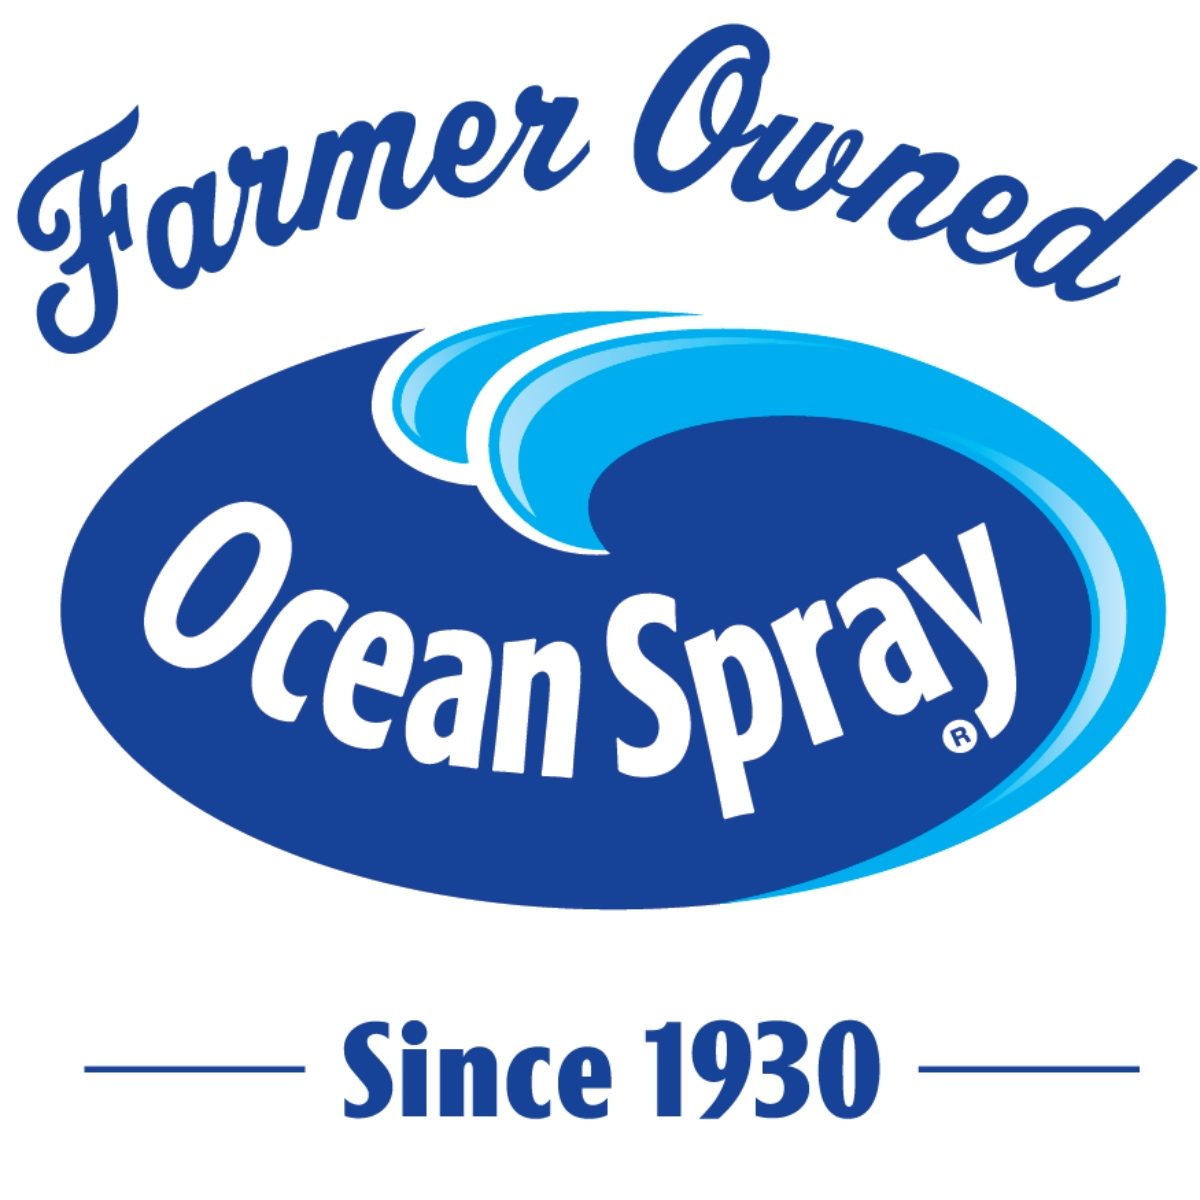 <p><strong><a class="SWhtmlLink" href="http://www.oceanspray.com" rel="noopener">Ocean Spray</a>, Lakeville</strong></p> <p>Today, Ocean Spray is a huge cooperative of over 700 growers, but it started with just three Massachusetts cranberry growers in 1930. Their first product was jellied cranberry sauce, but they quickly segued into the juice market.</p>